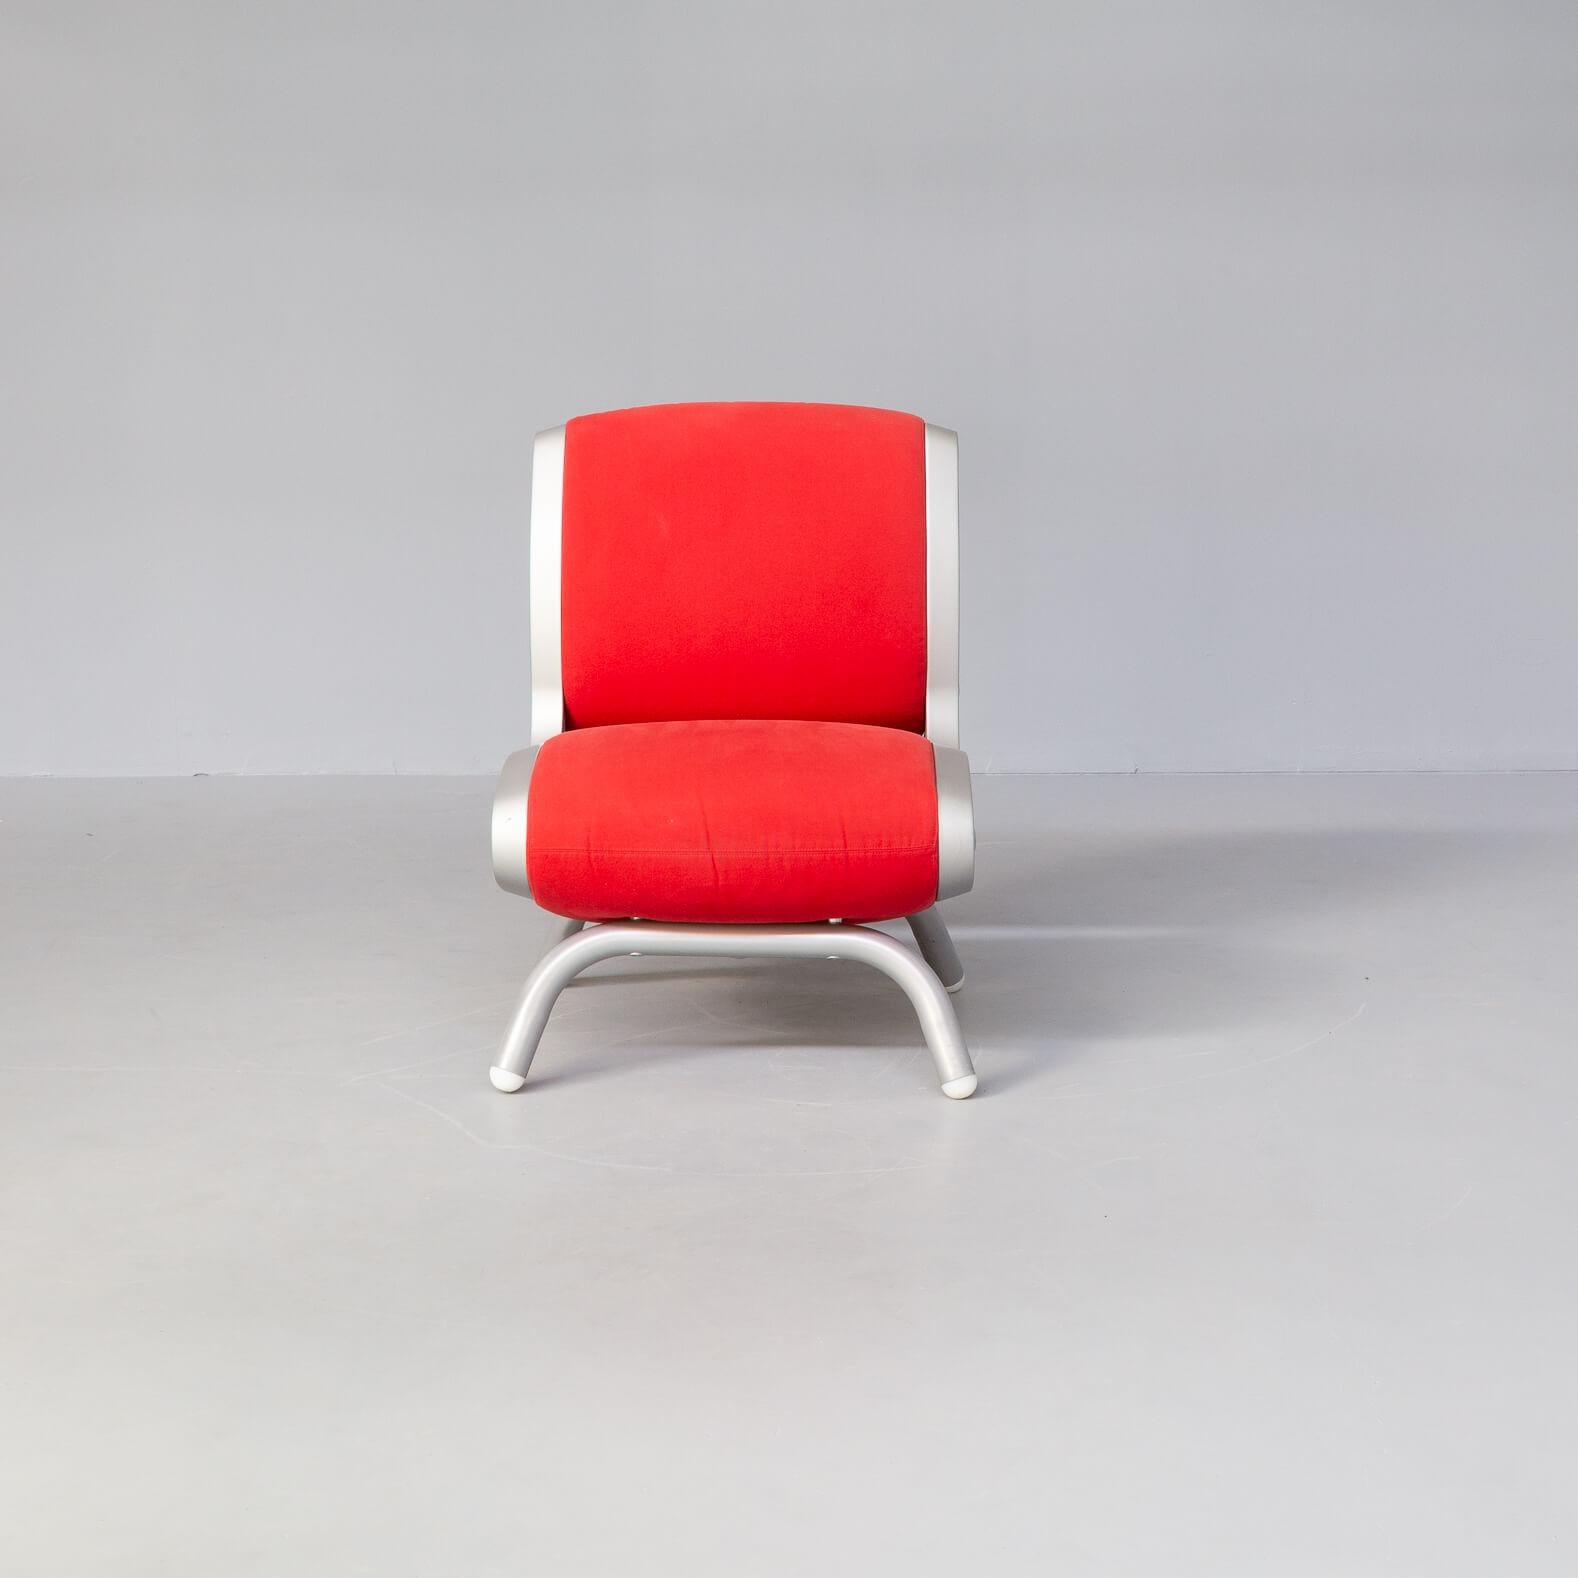 The impressive ‘Gluon’ chair has a lacquered steel and firm frame with rounded feet, ever more rare than the well known swivel based variant. The barrel supporting the seat rises from here and is made of silver tinted polyurethane with red fabric